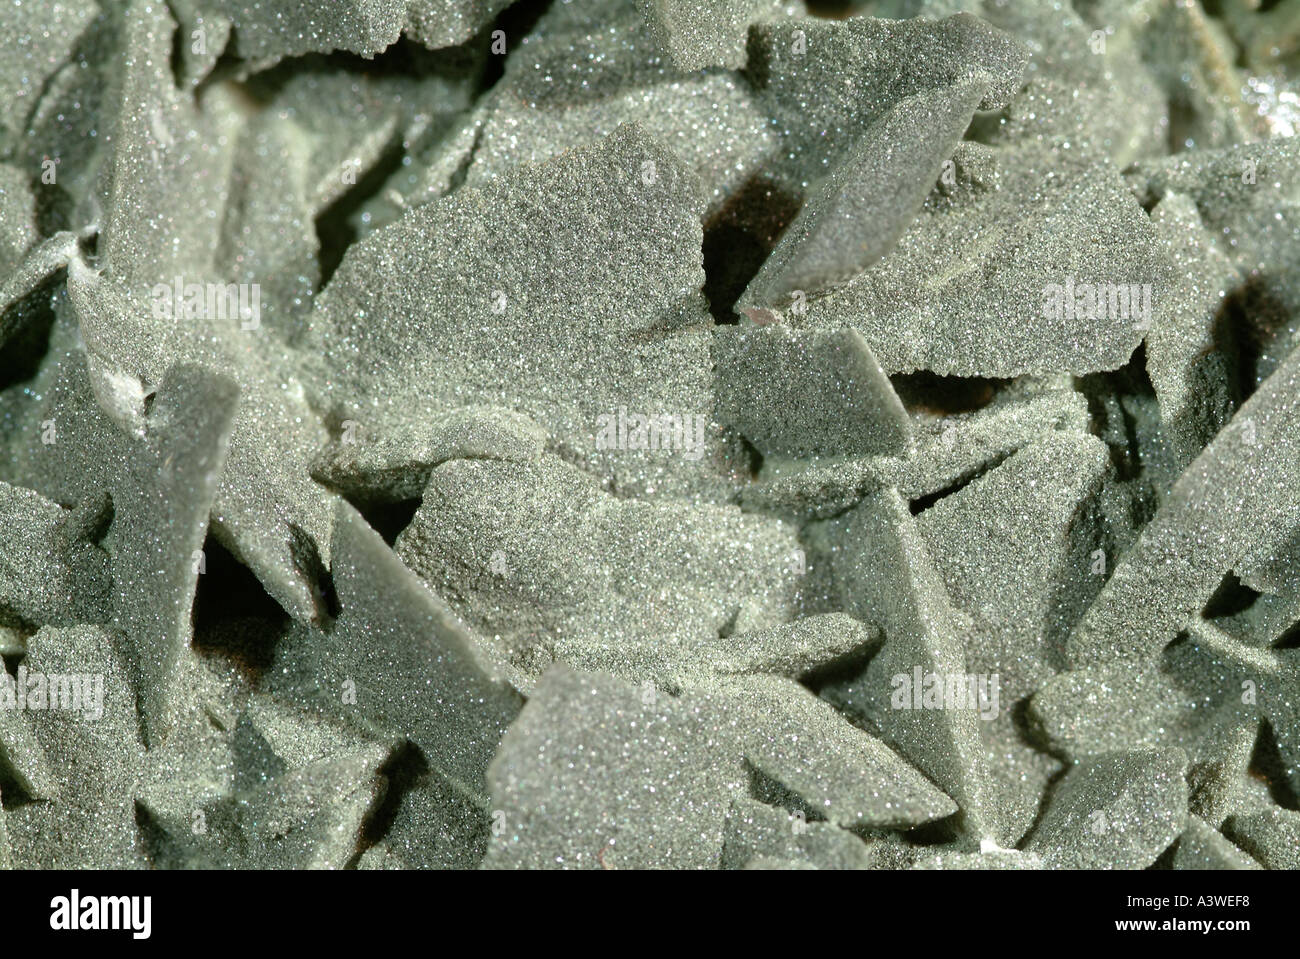 Mineral Ferro-axinite, axinite crystals coated with a dusting of chlorite, Puiva, Saranpual, Polar Urals, Russia Stock Photo